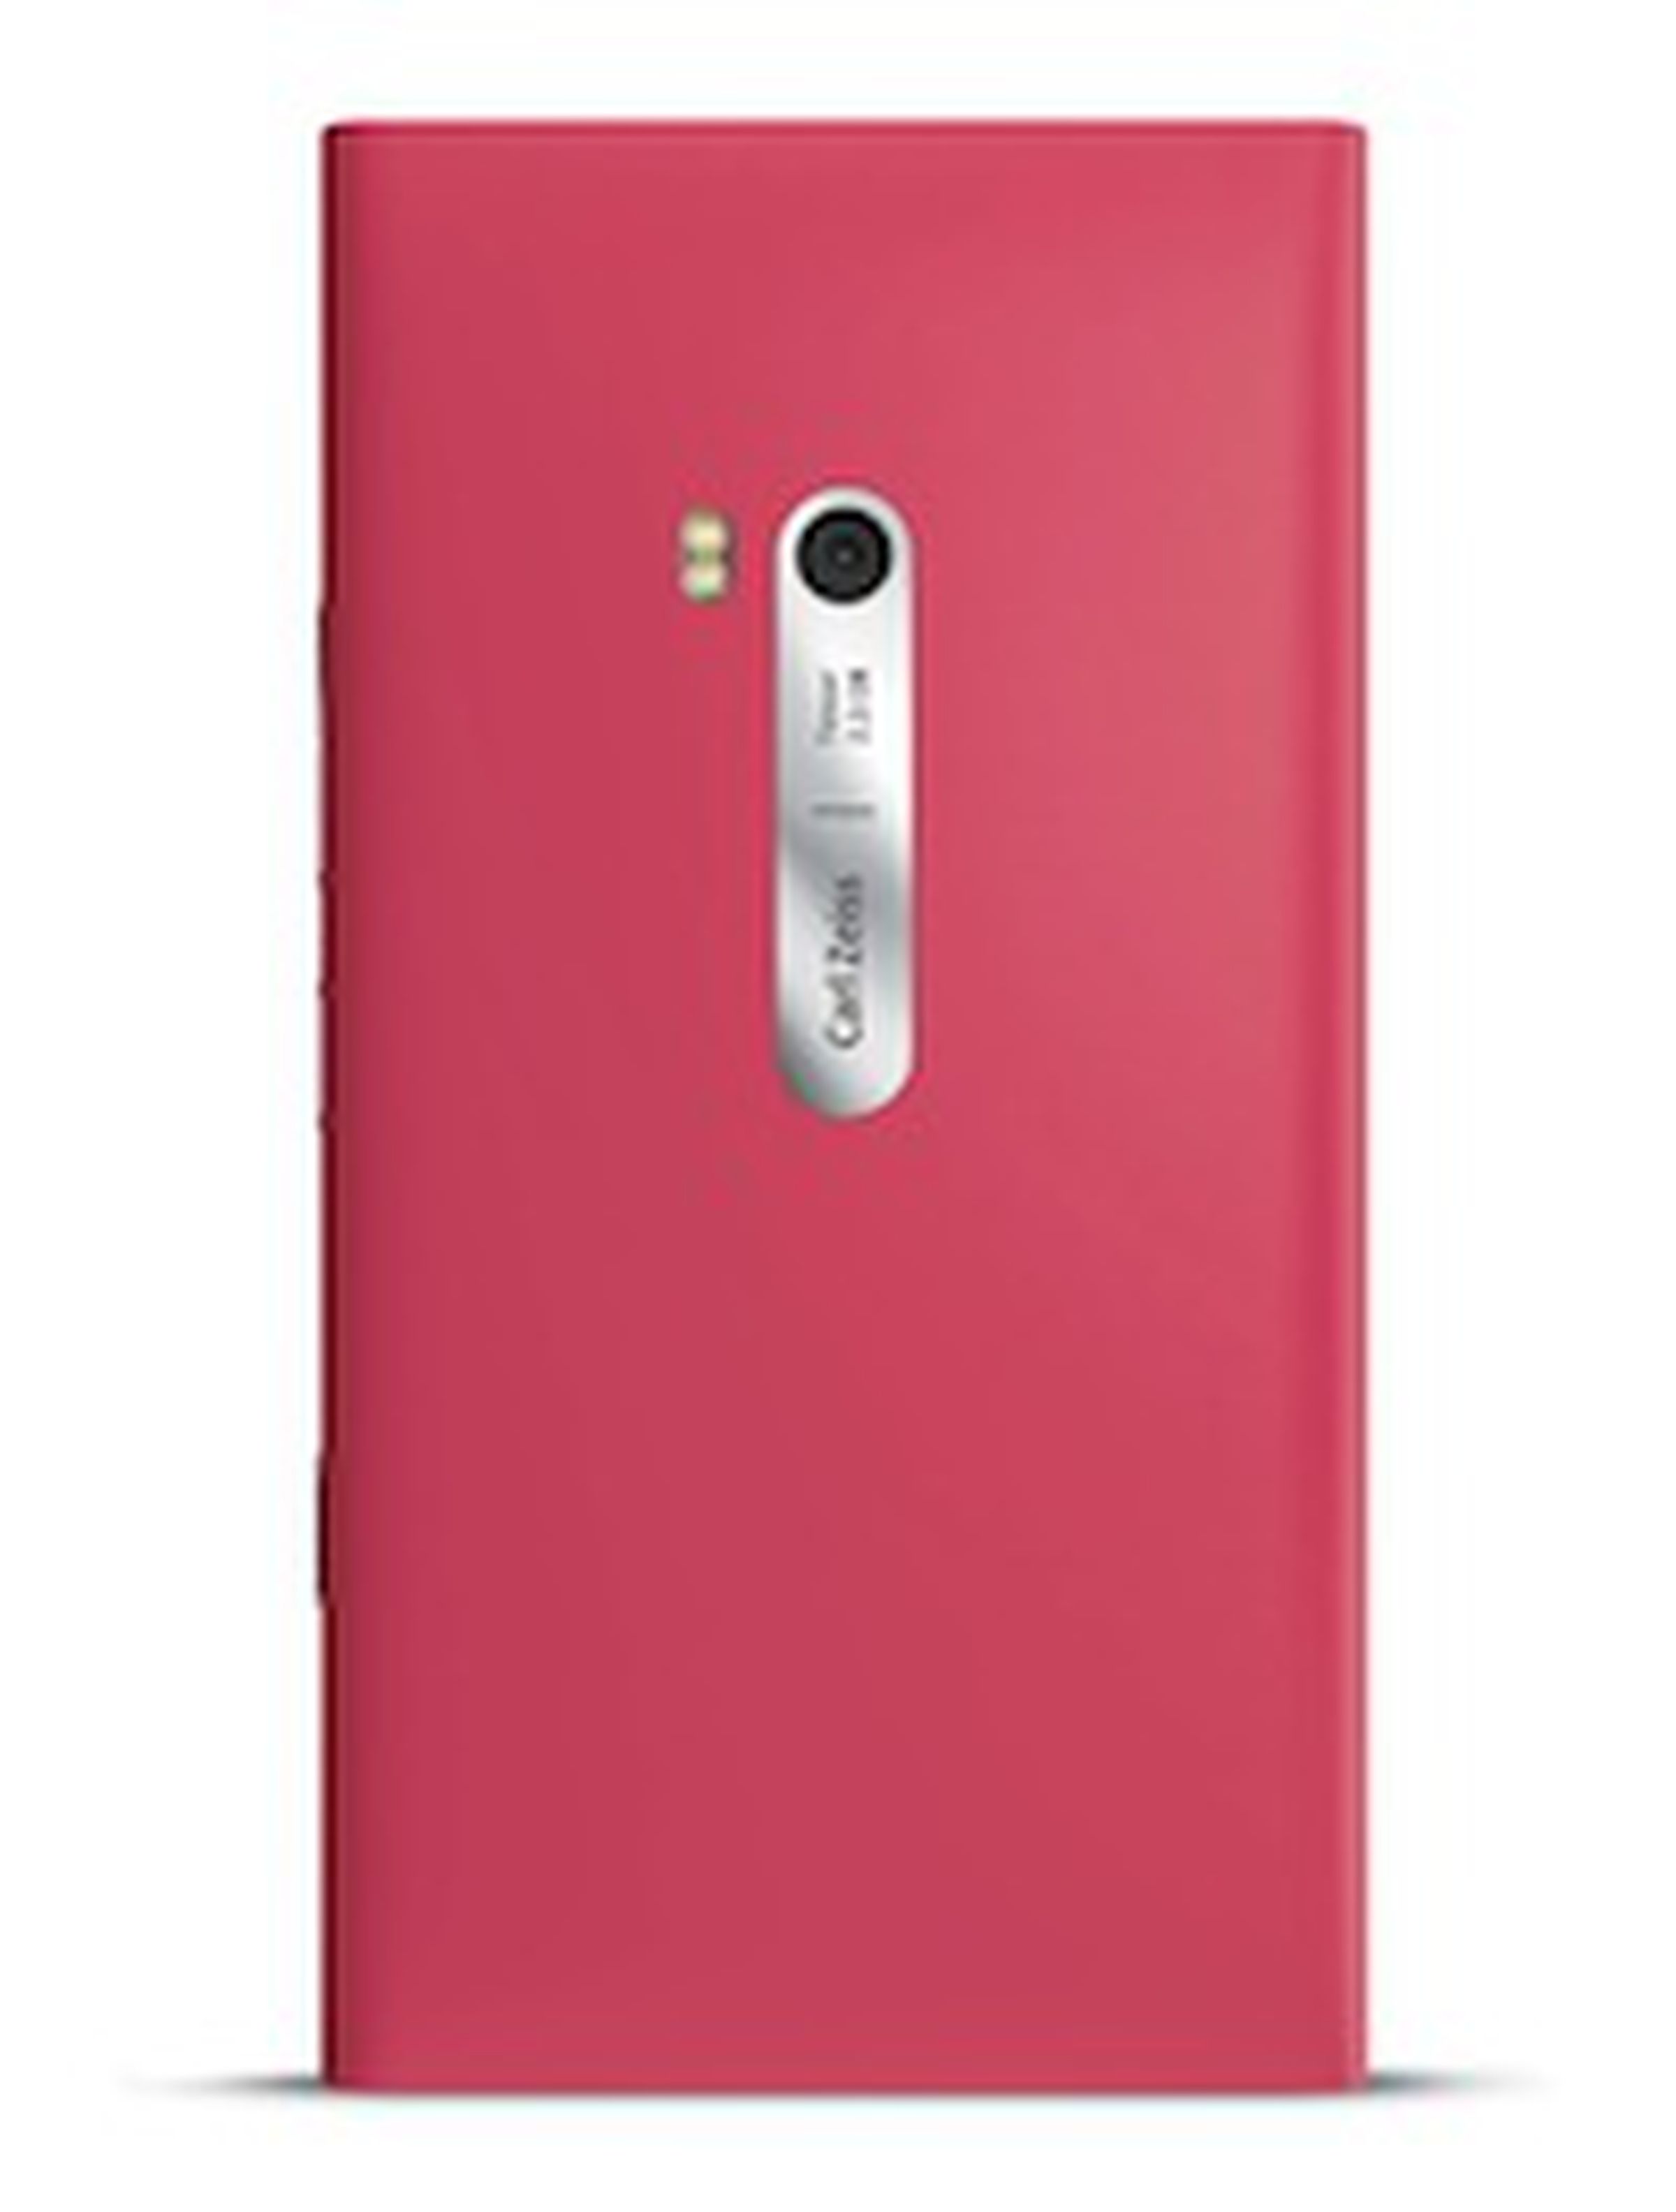 Nokia Lumia 900 pink edition pictures